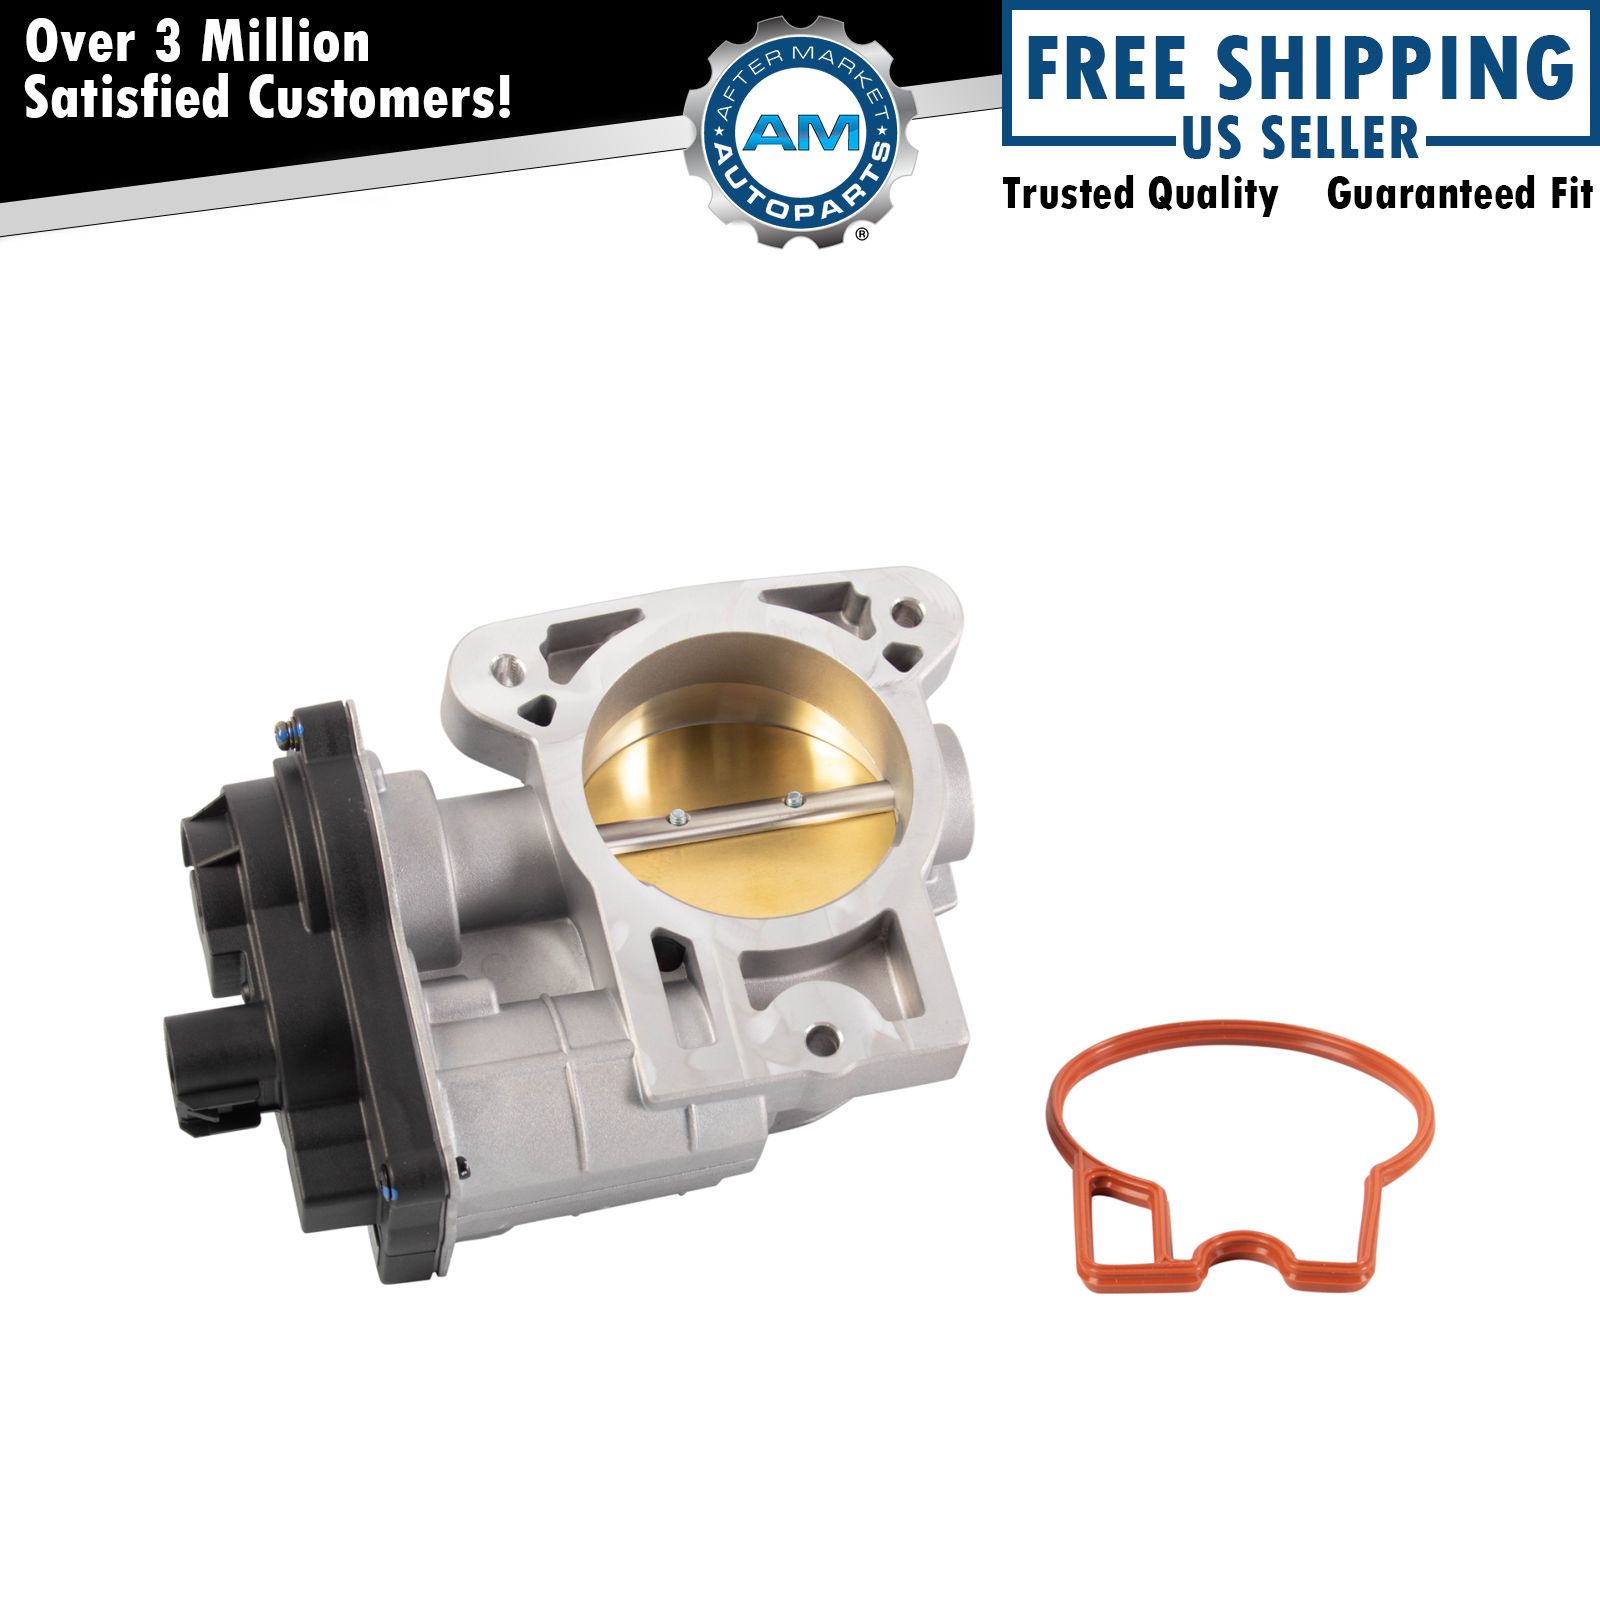 Throttle Body Assembly Fits 2002-2007 Cadillac Chevrolet GMC Hummer Buick